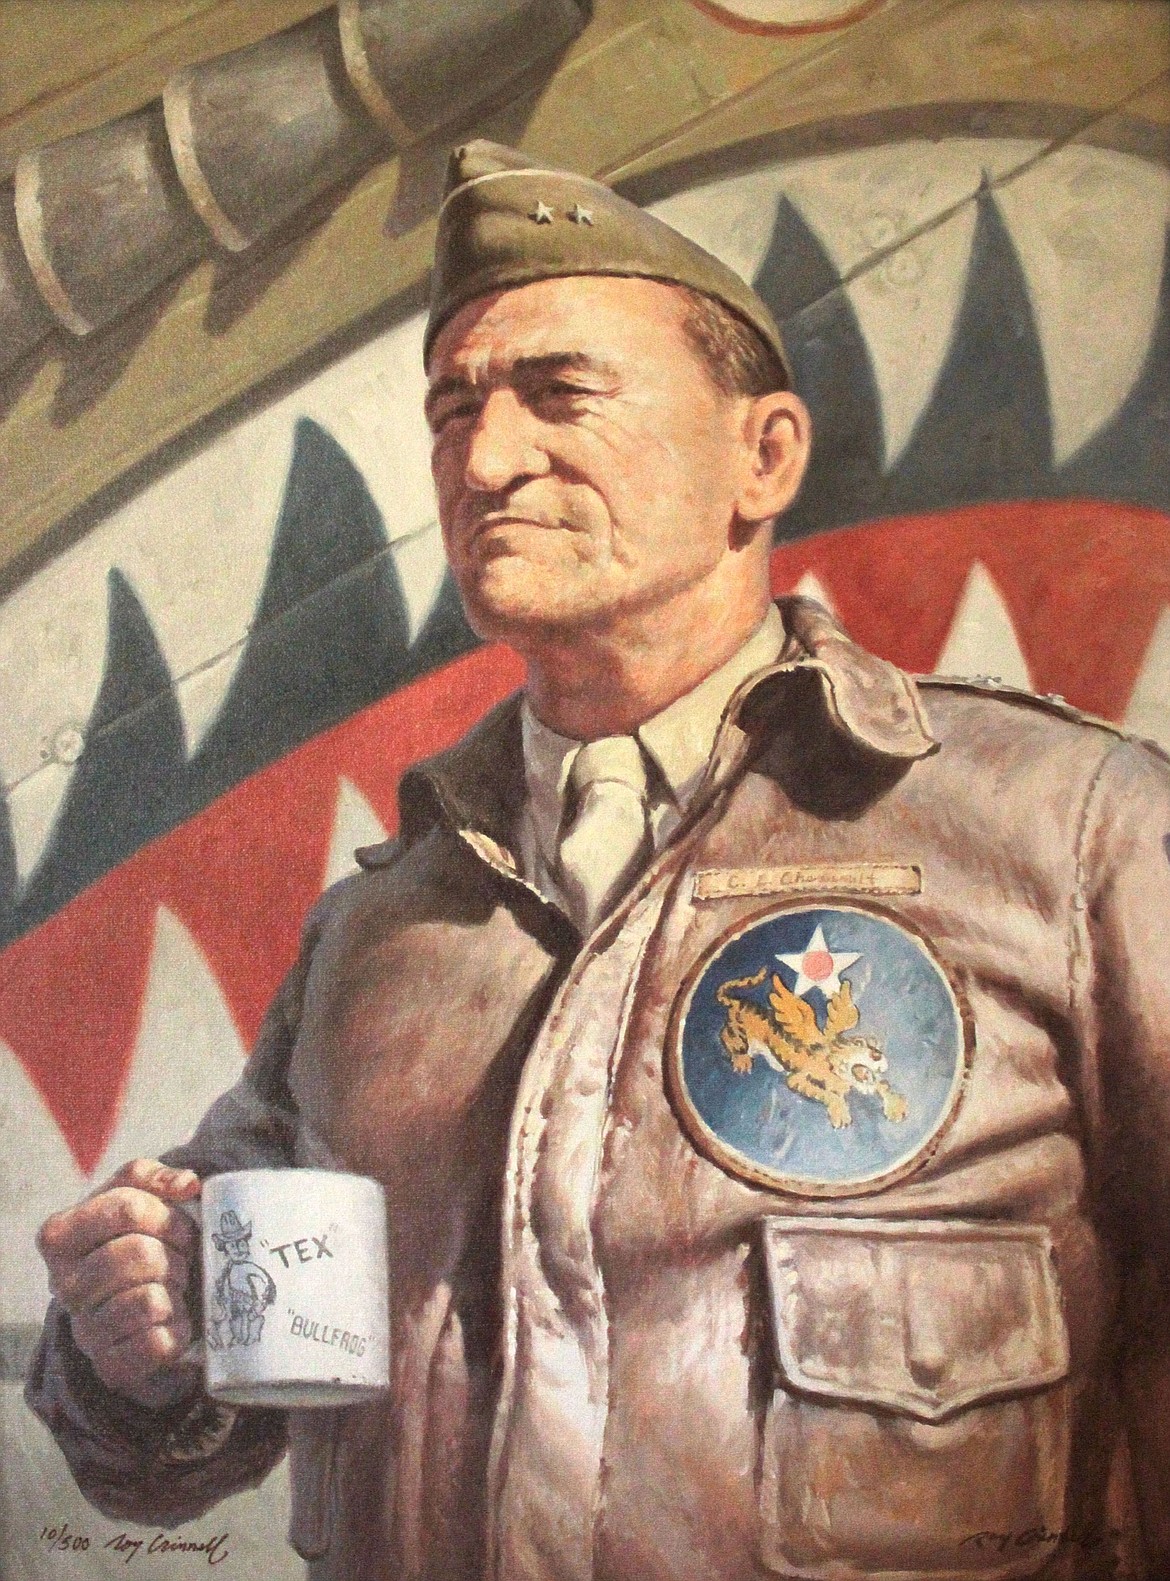 Texas-born General Claire L. Chennault (1893-1958) founded the Flying Tigers AVG (American Volunteer Group) fighter squadron to aid the British in Burma and China’s Chiang Kai-shek to fight the Japanese in World War II.